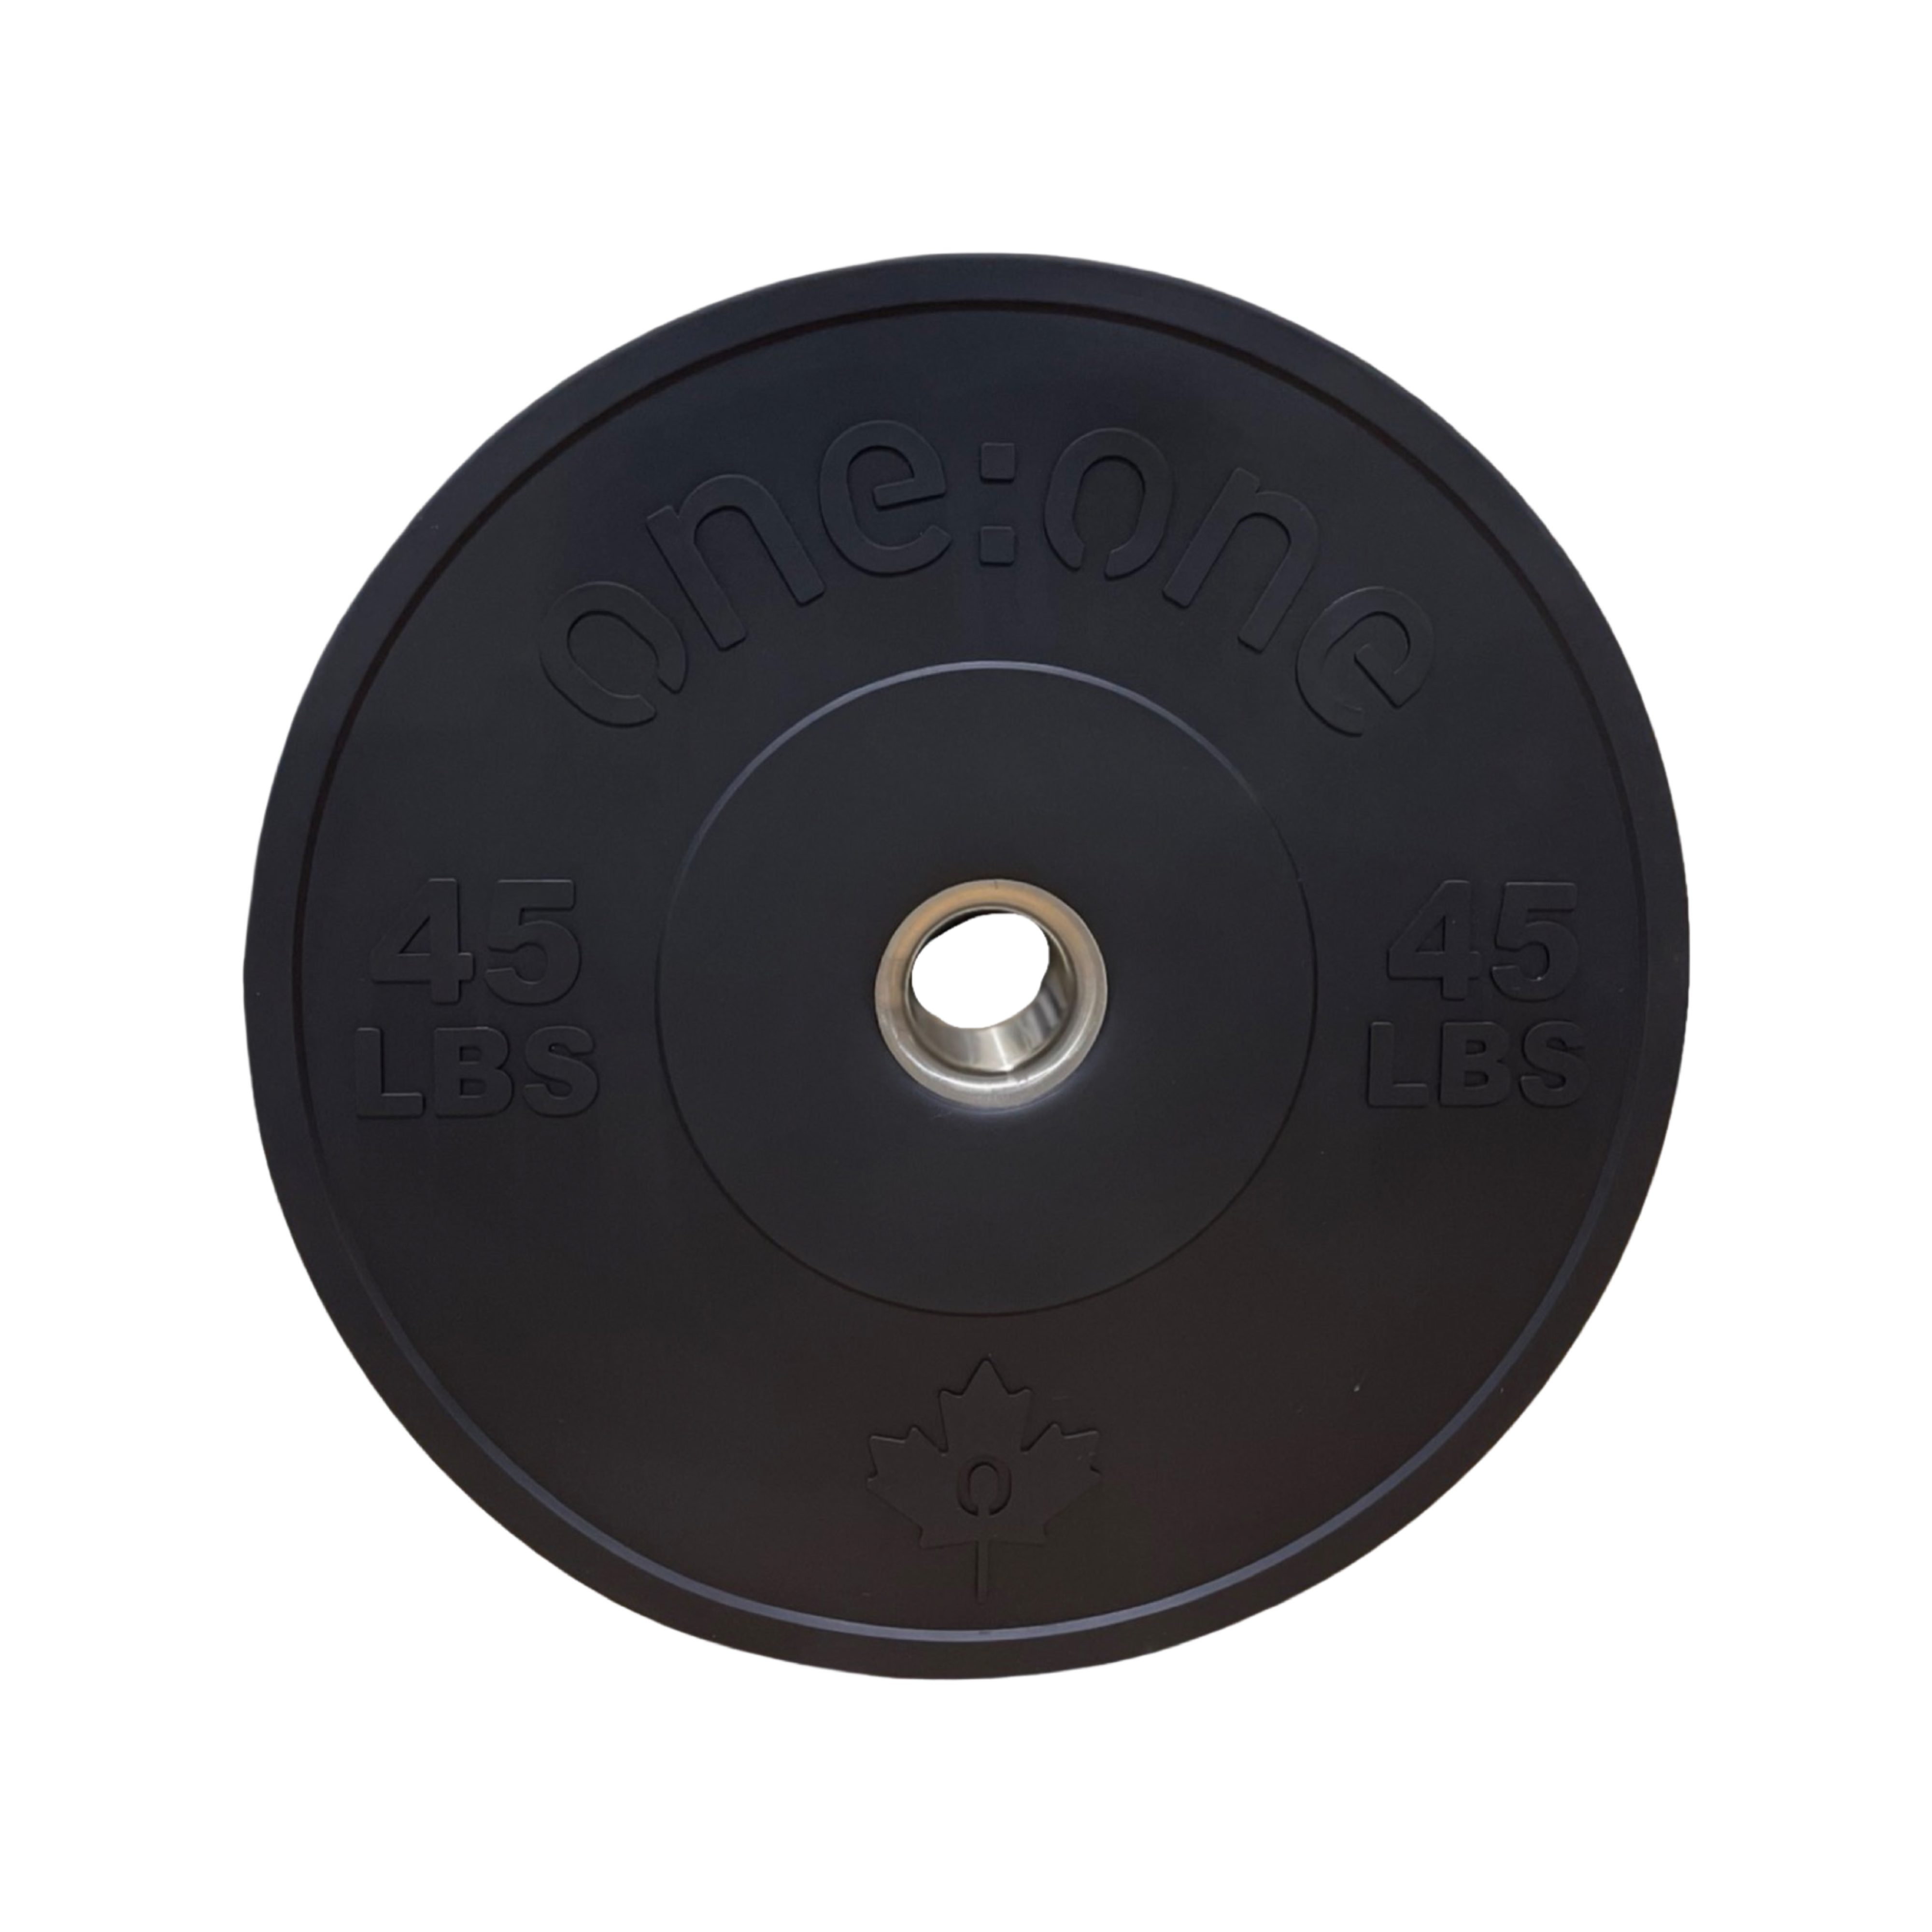 Competition Demo Equipment - One:One Rubber Bumper Plates